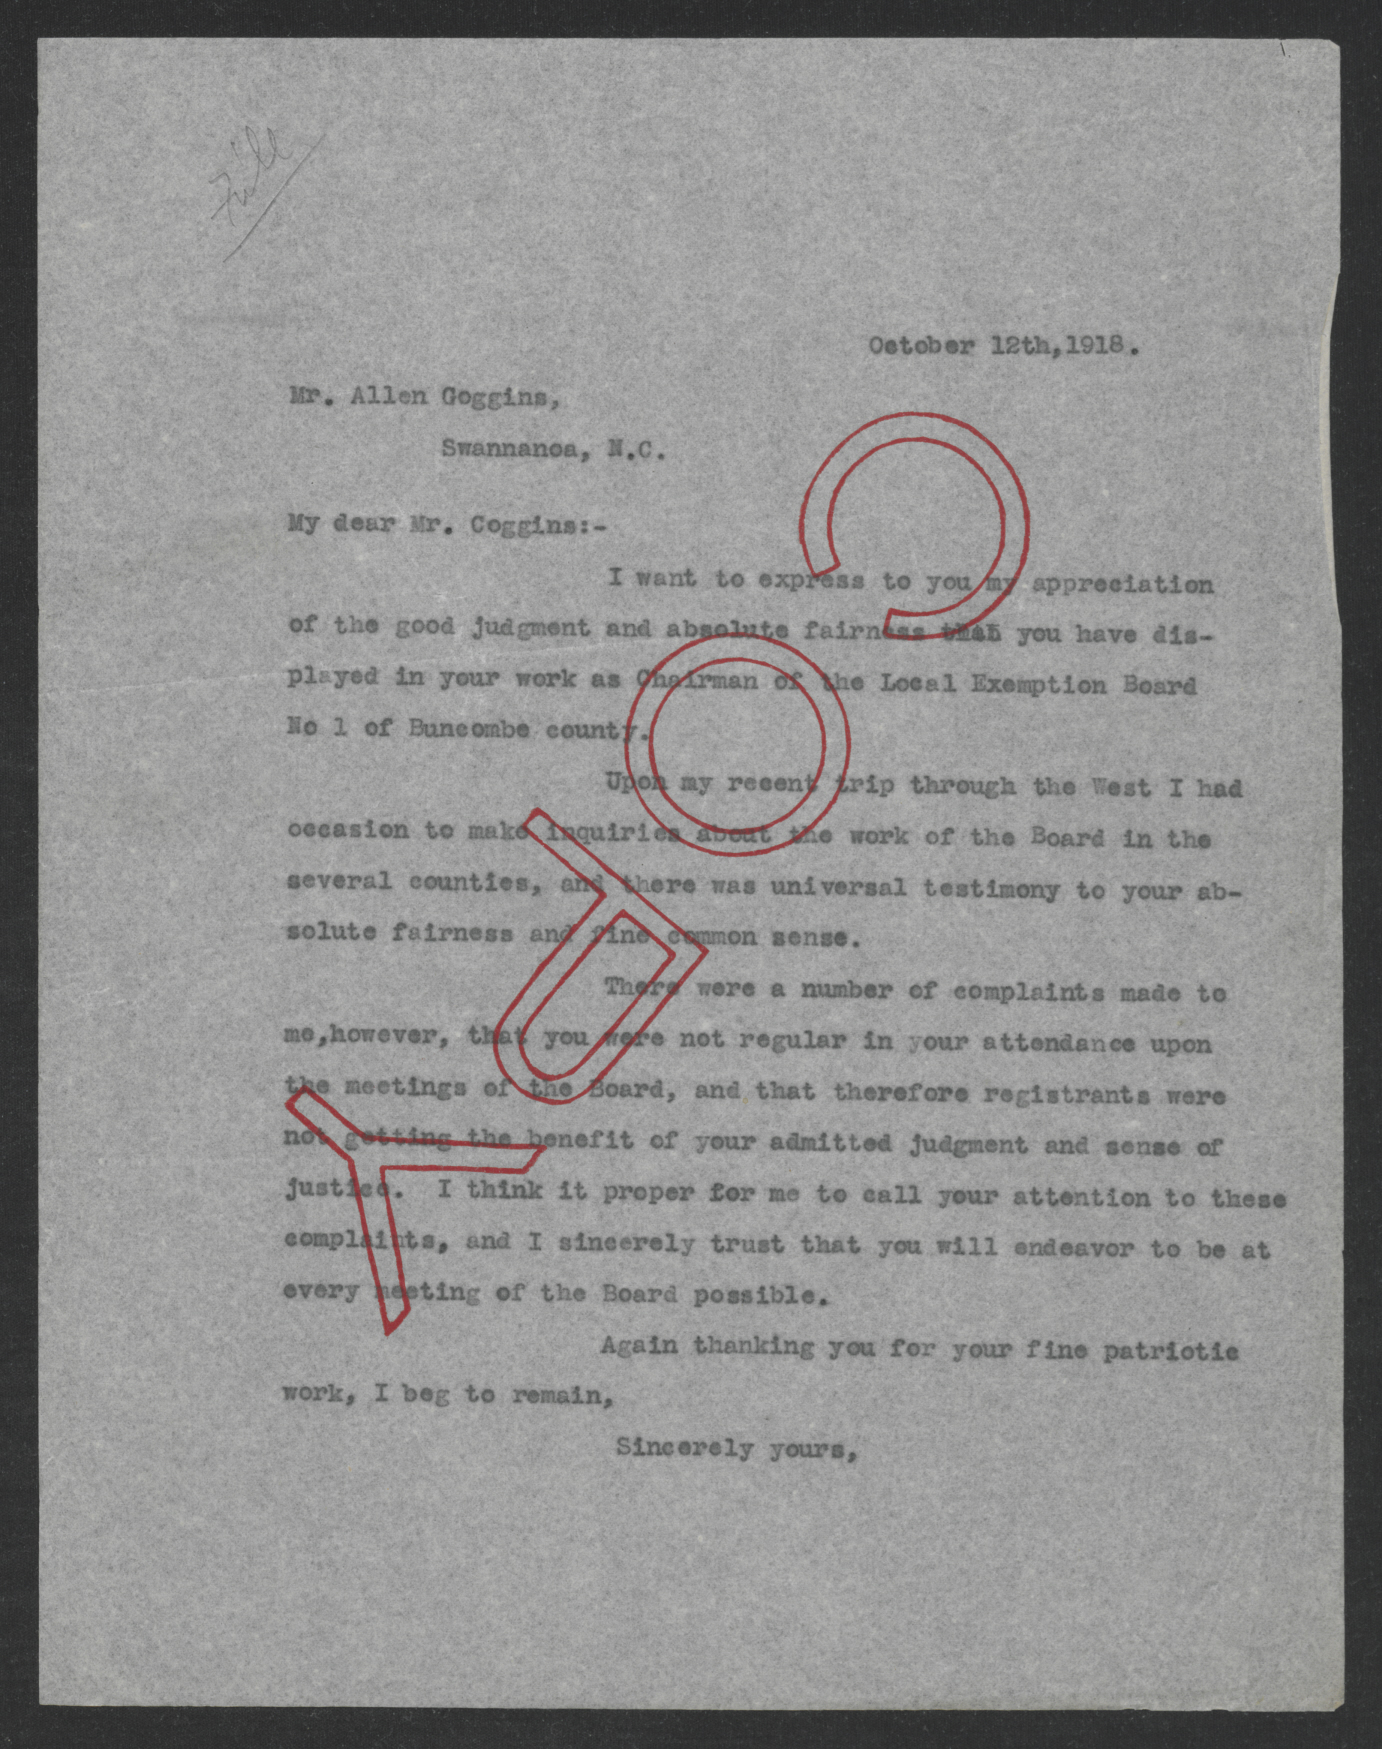 Letter from Thomas W. Bickett to Henry A. Coggins, October 12, 1918